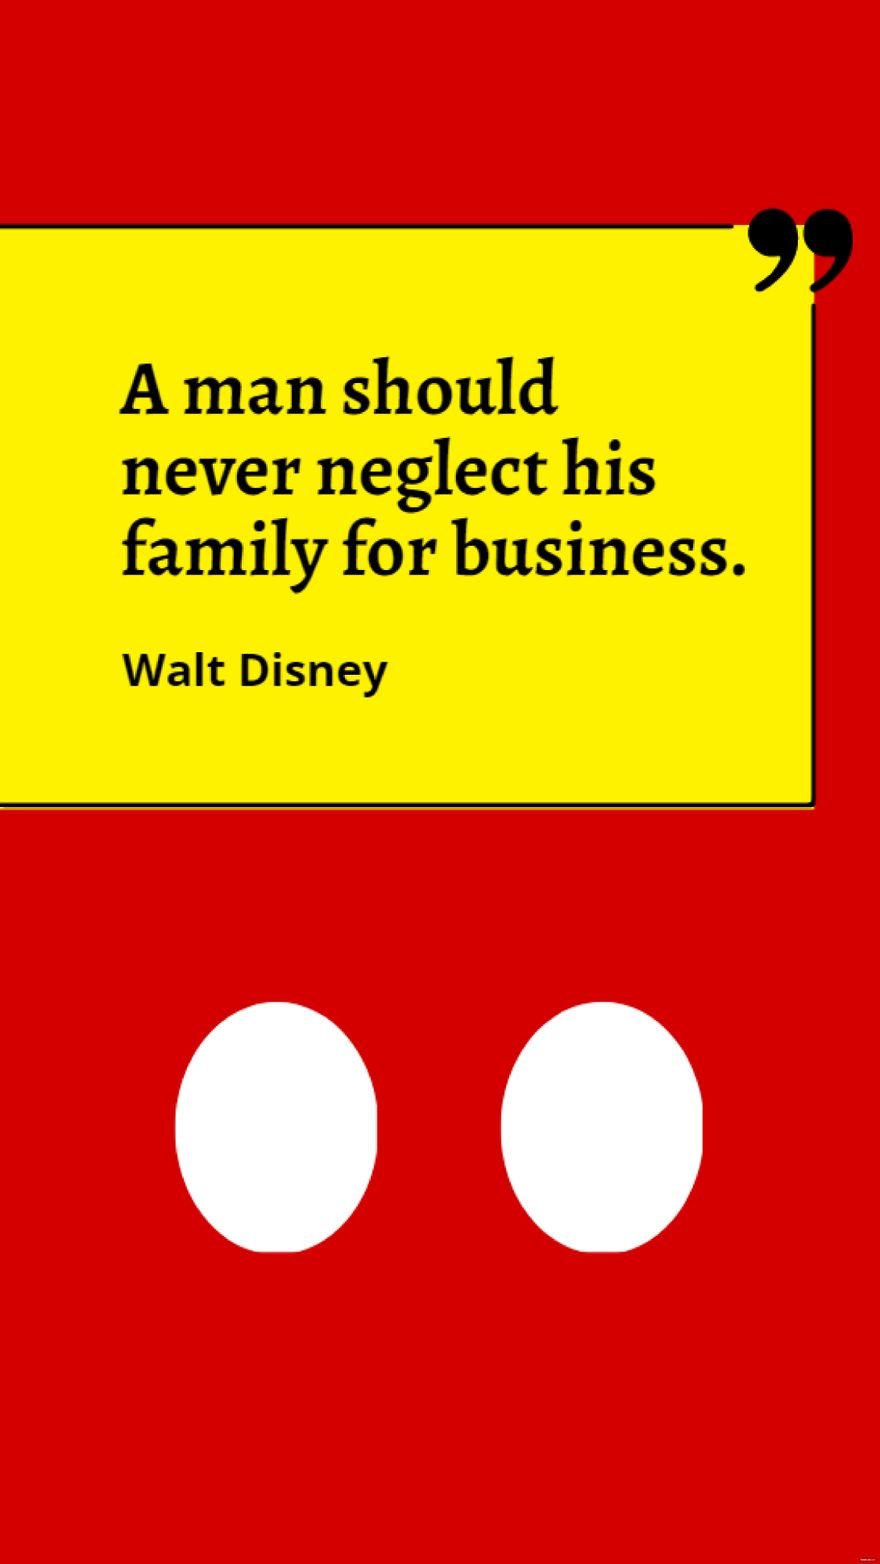 Free Walt Disney - A man should never neglect his family for business. in JPG